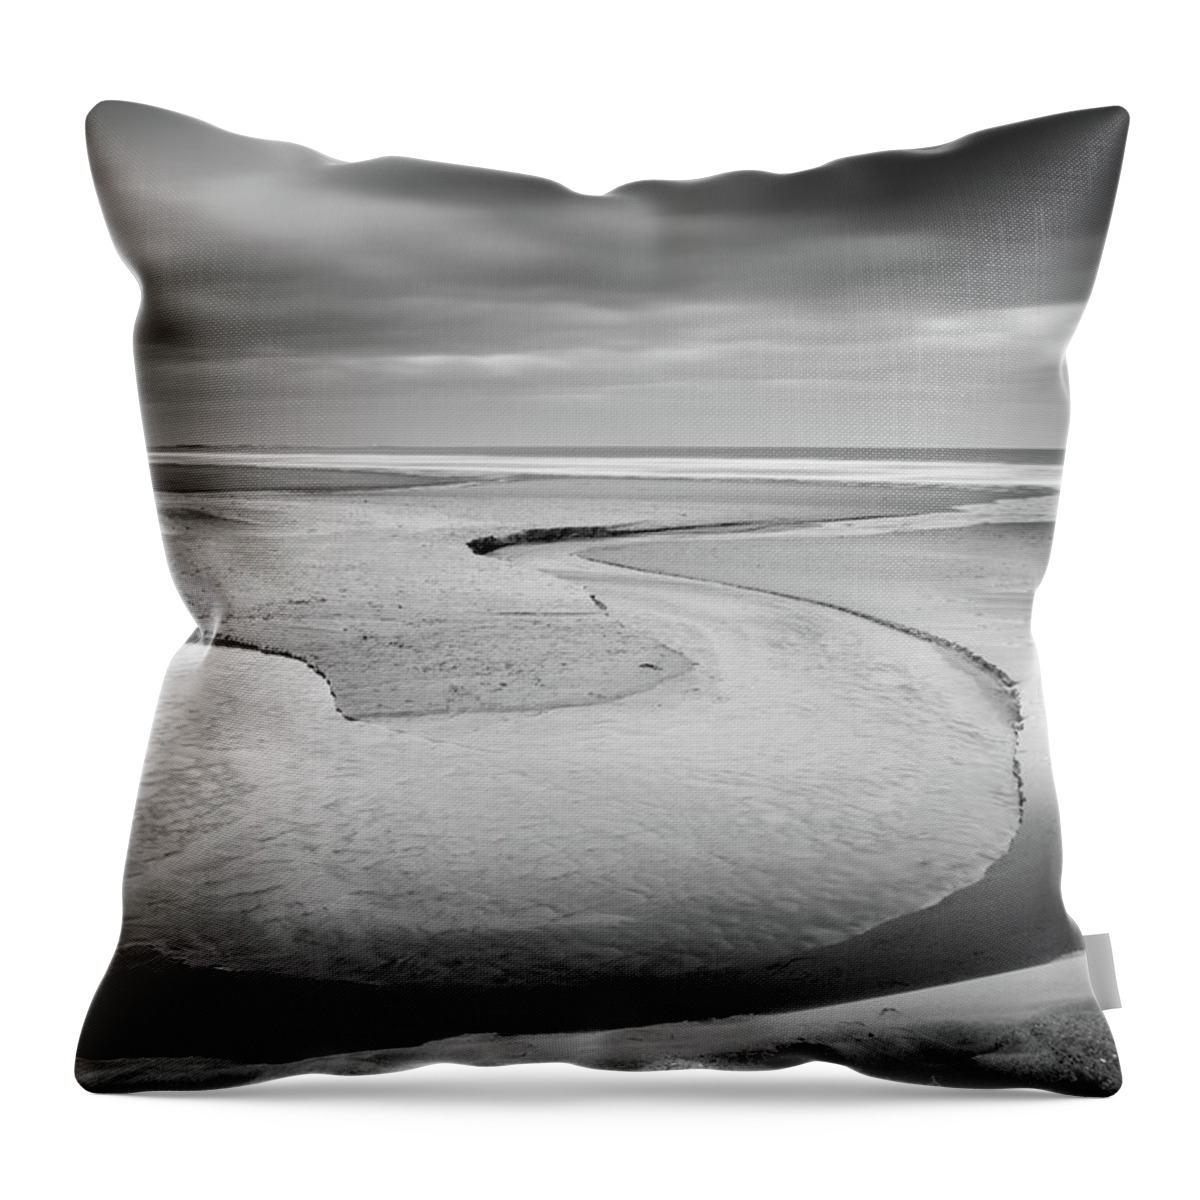 Black And White Throw Pillow featuring the photograph S by Anita Nicholson